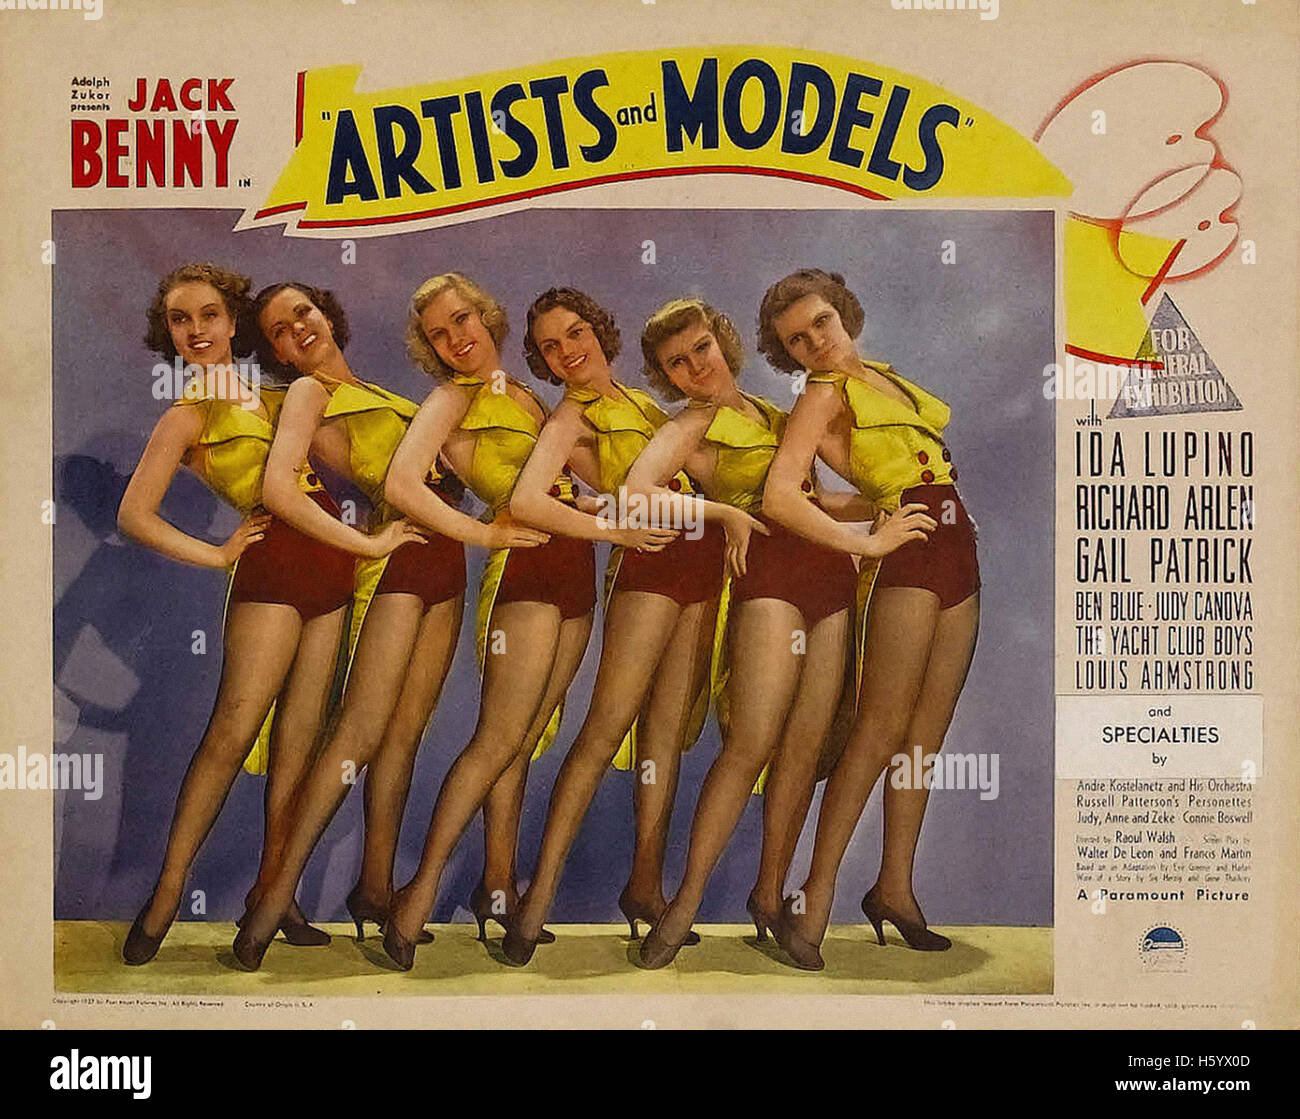 Artists and Models (1937) - Movie Poster Stock Photo